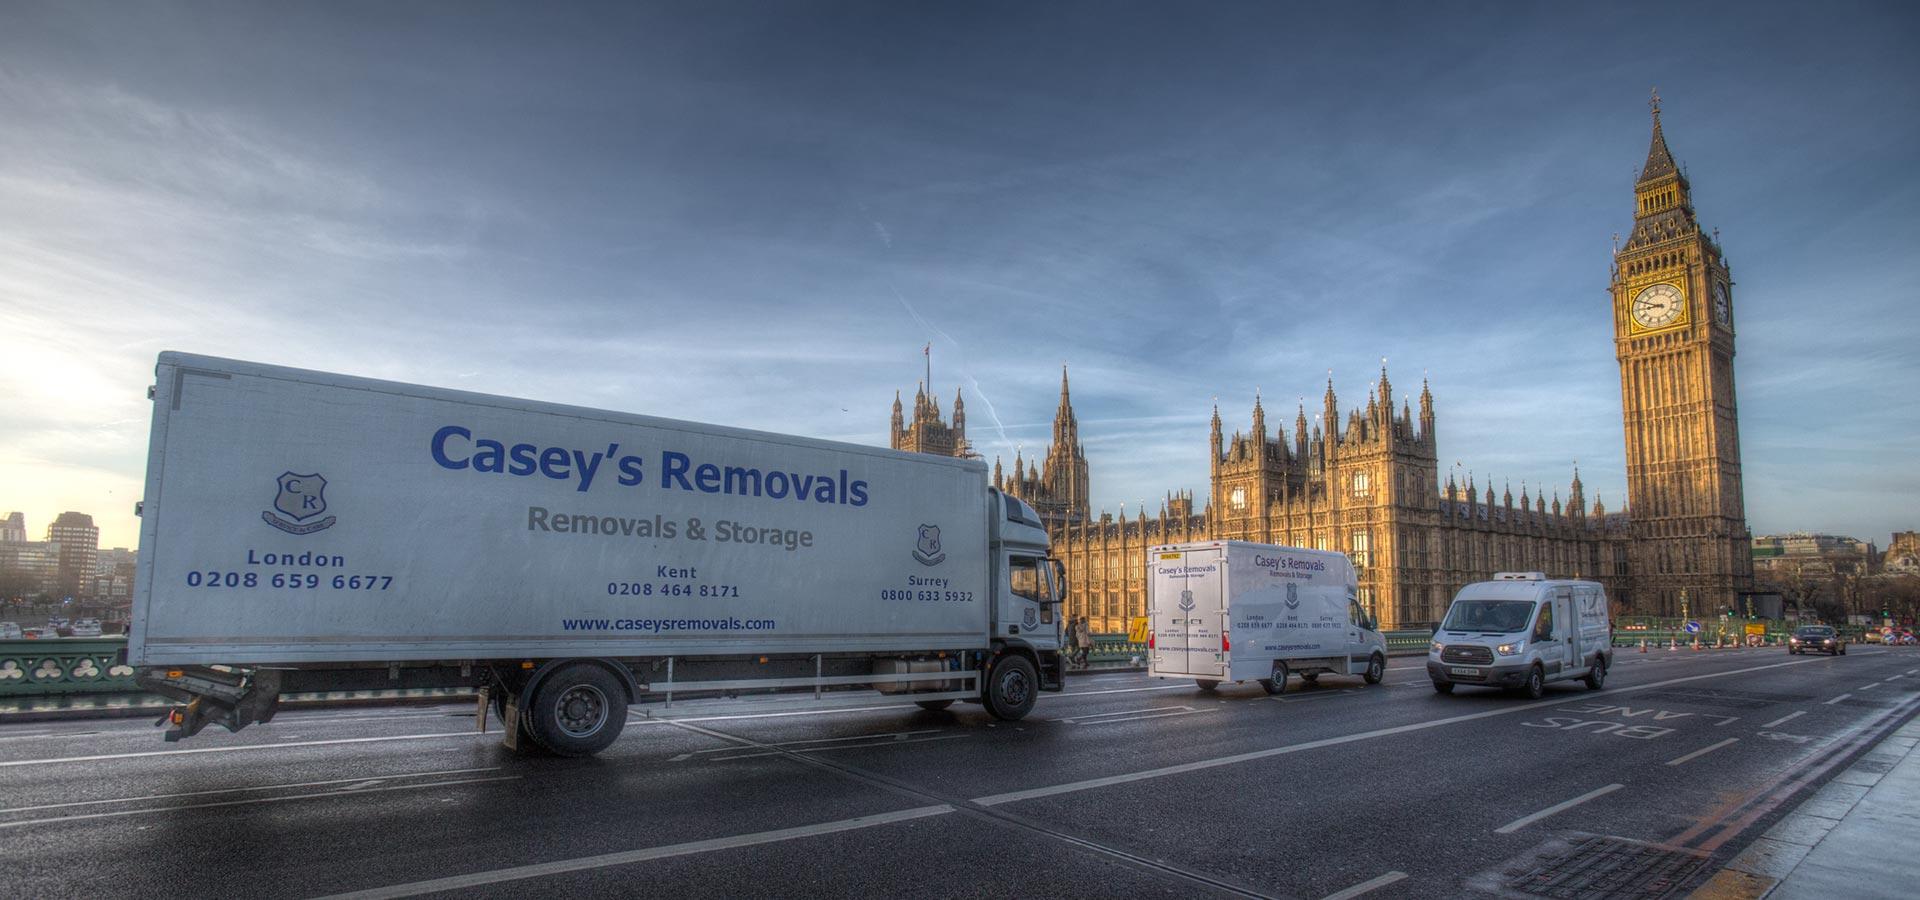 Casey's Office Relocations London 08006 335932